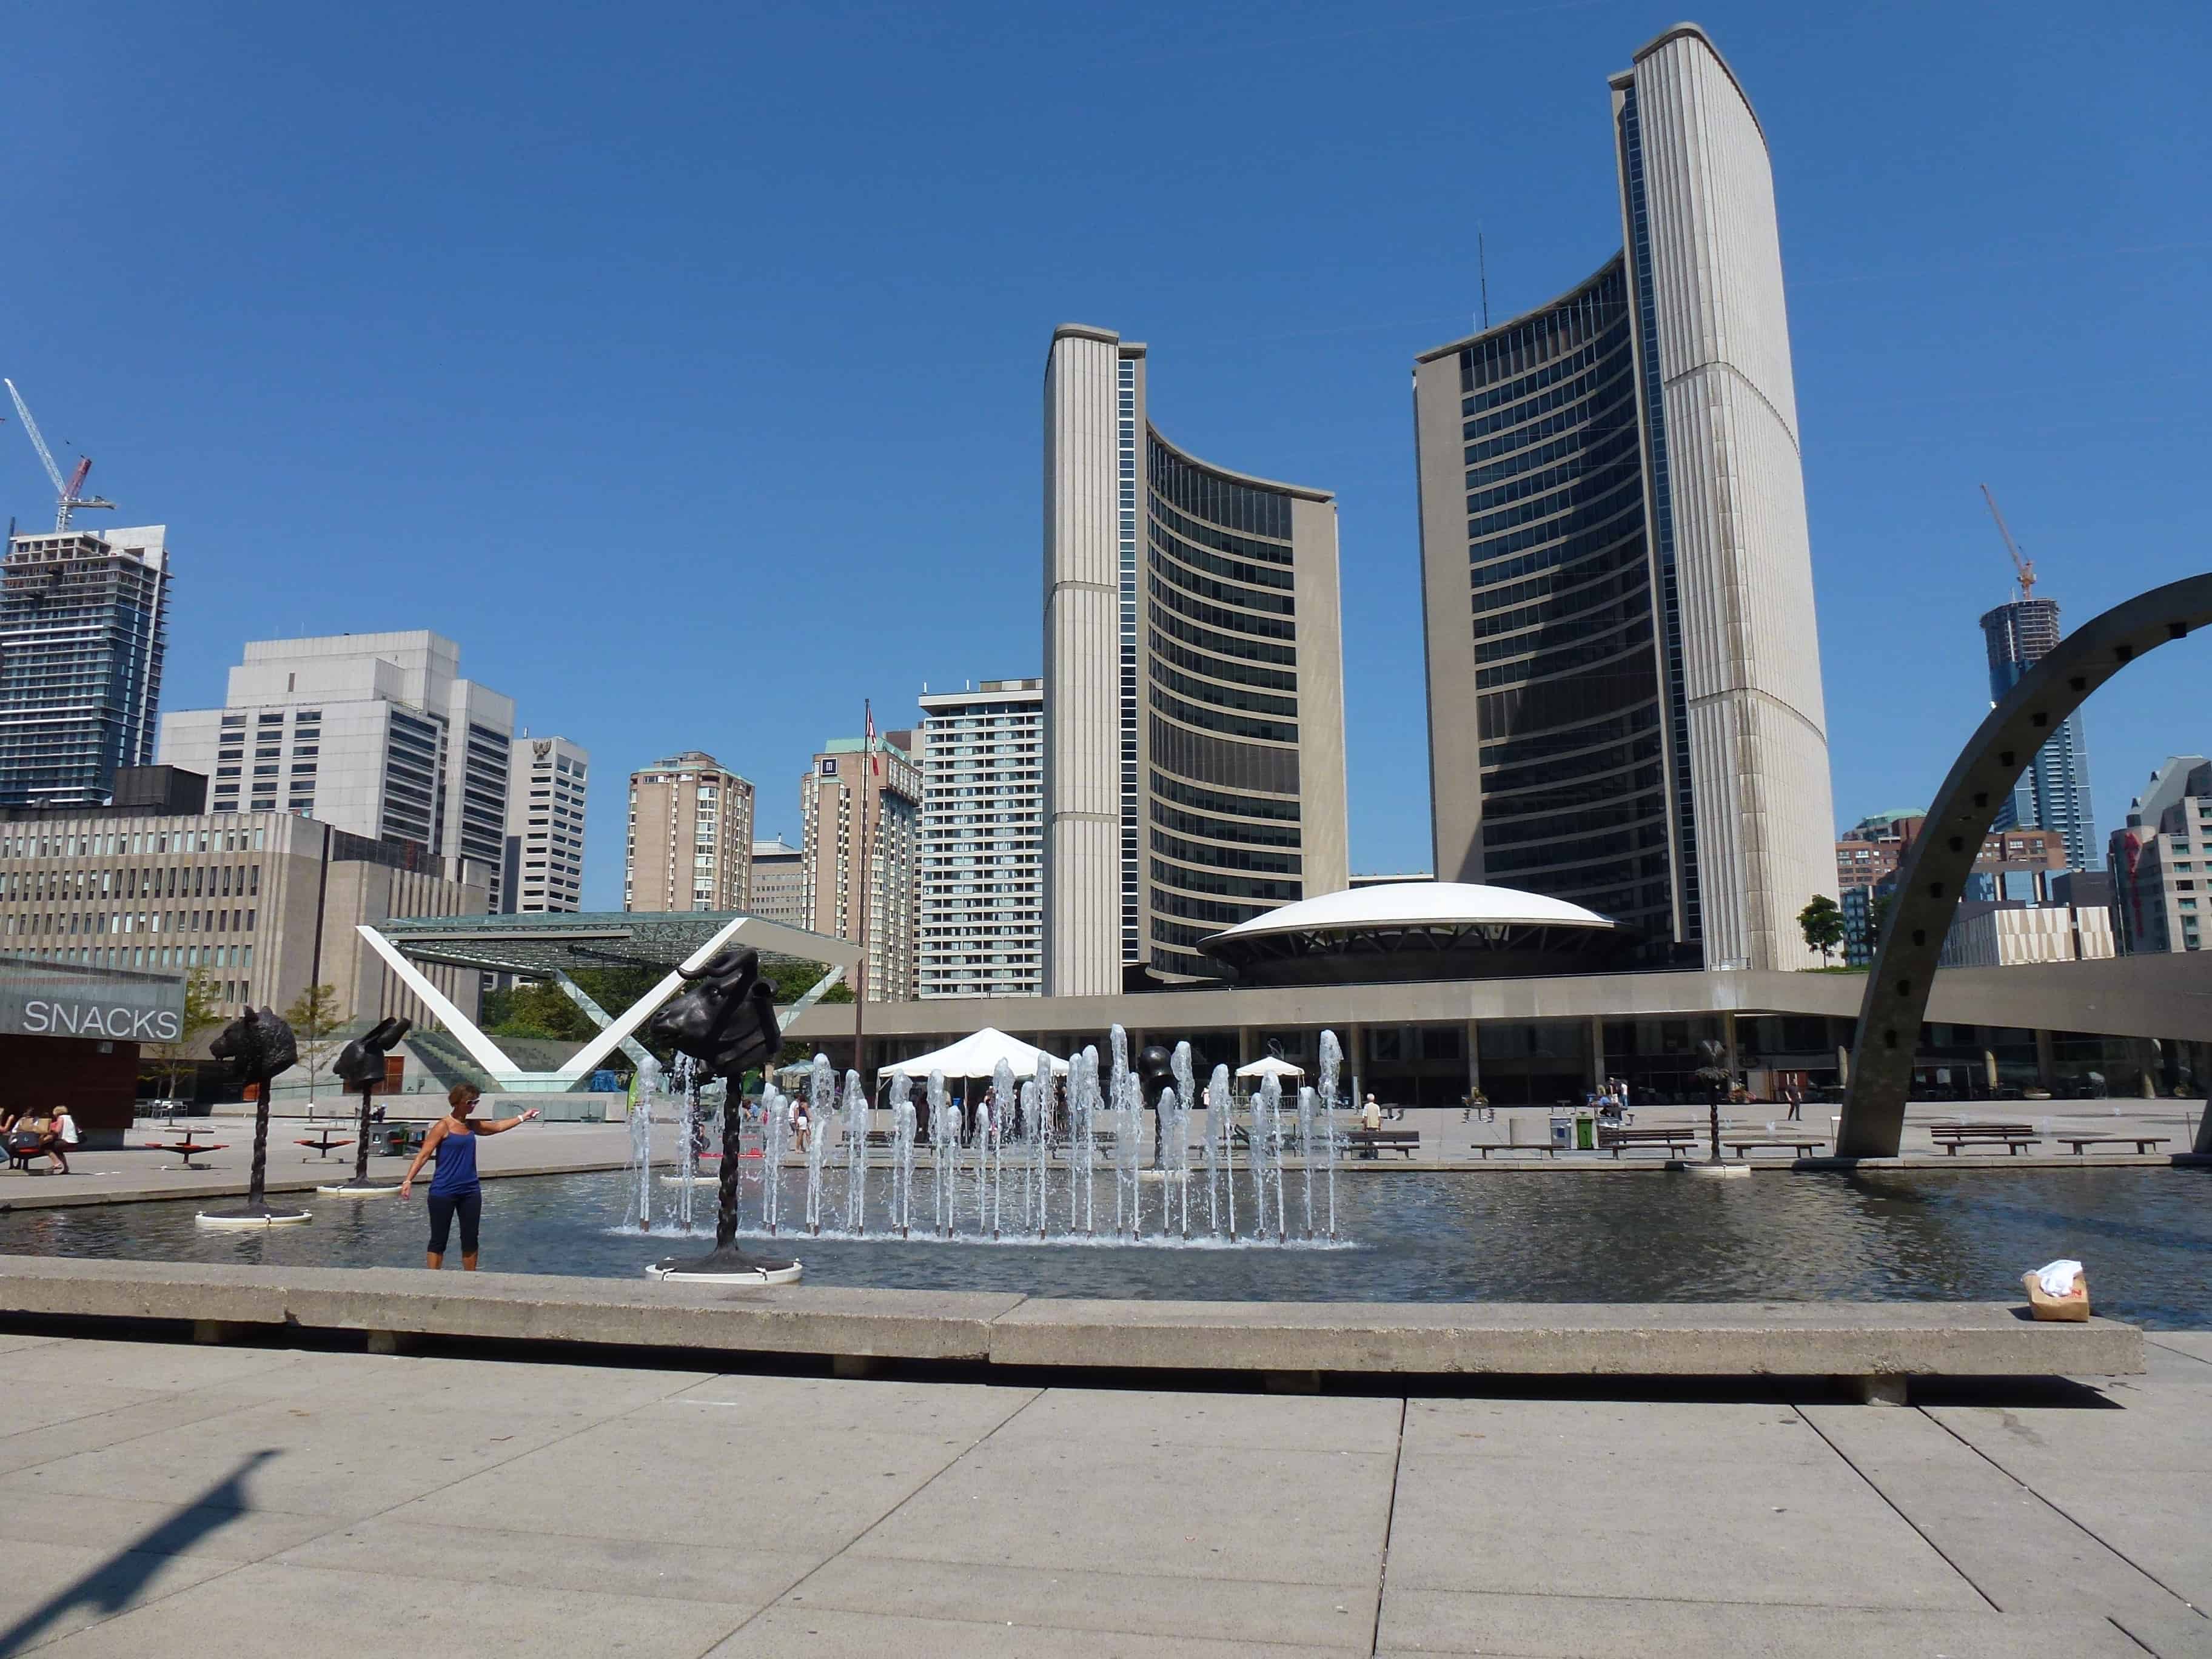 City Hall on Nathan Phillips Square in Toronto, Ontario, Canada